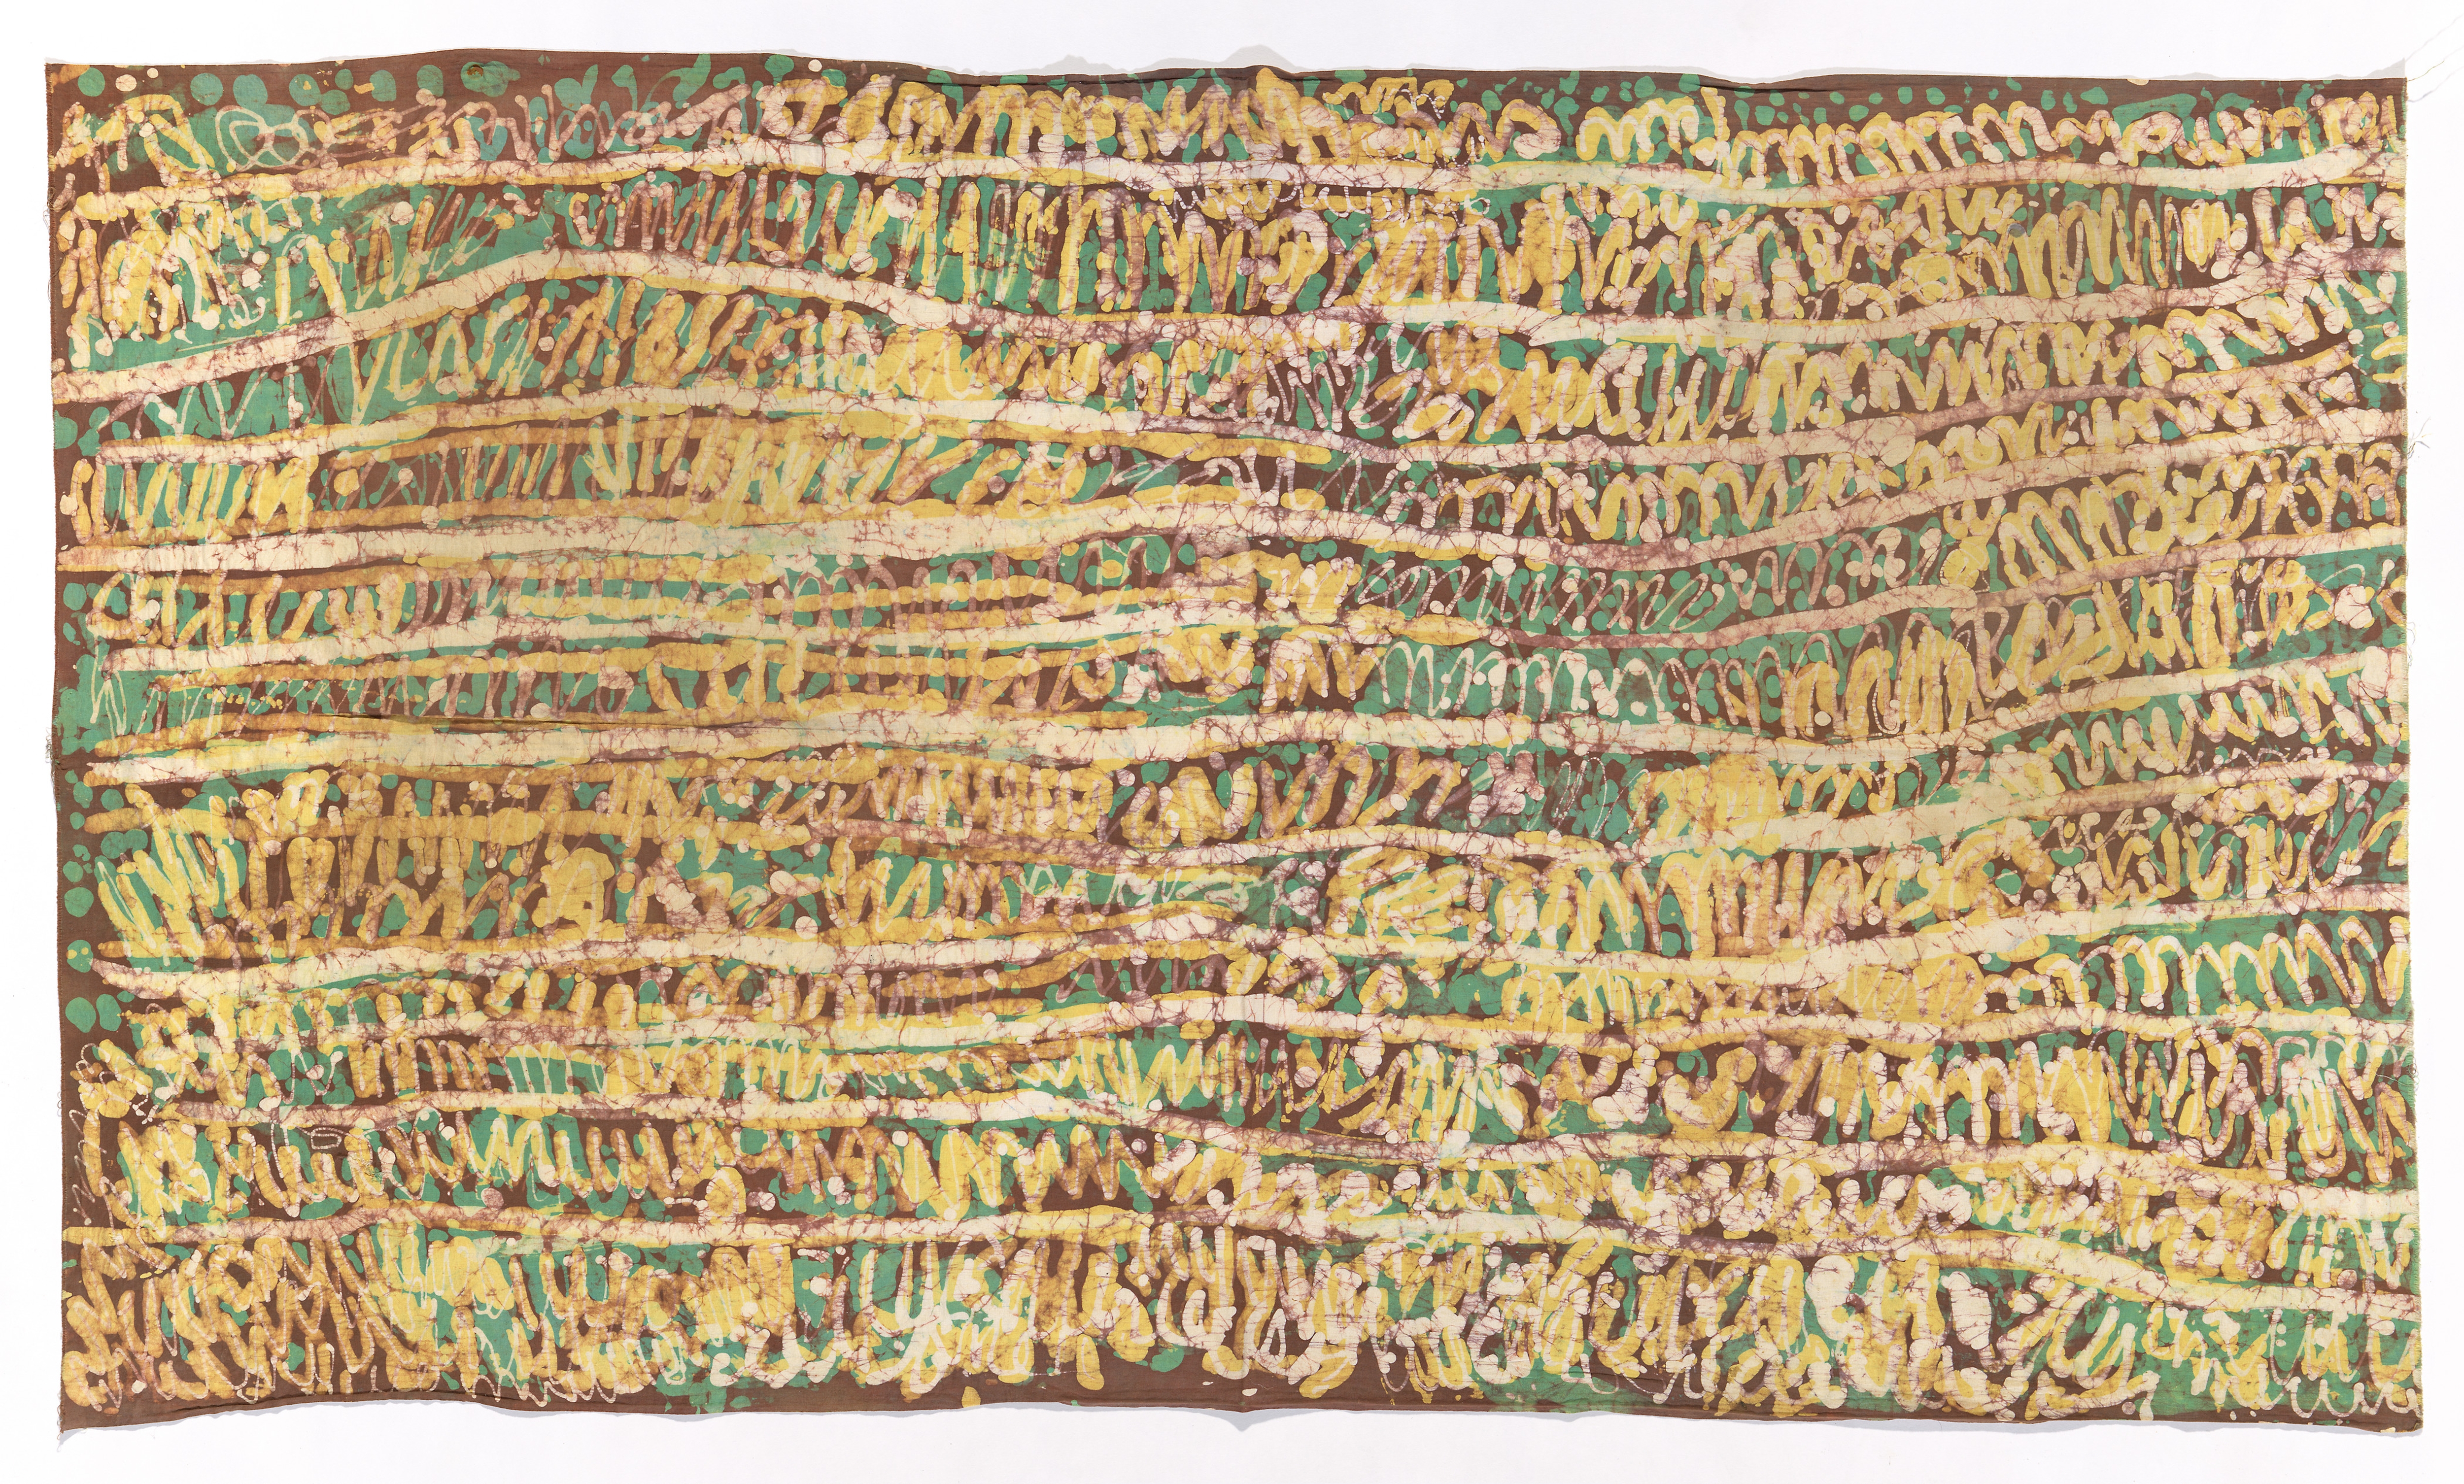 A batik artwork with squiggled rows of green and yellow lines on a brown background